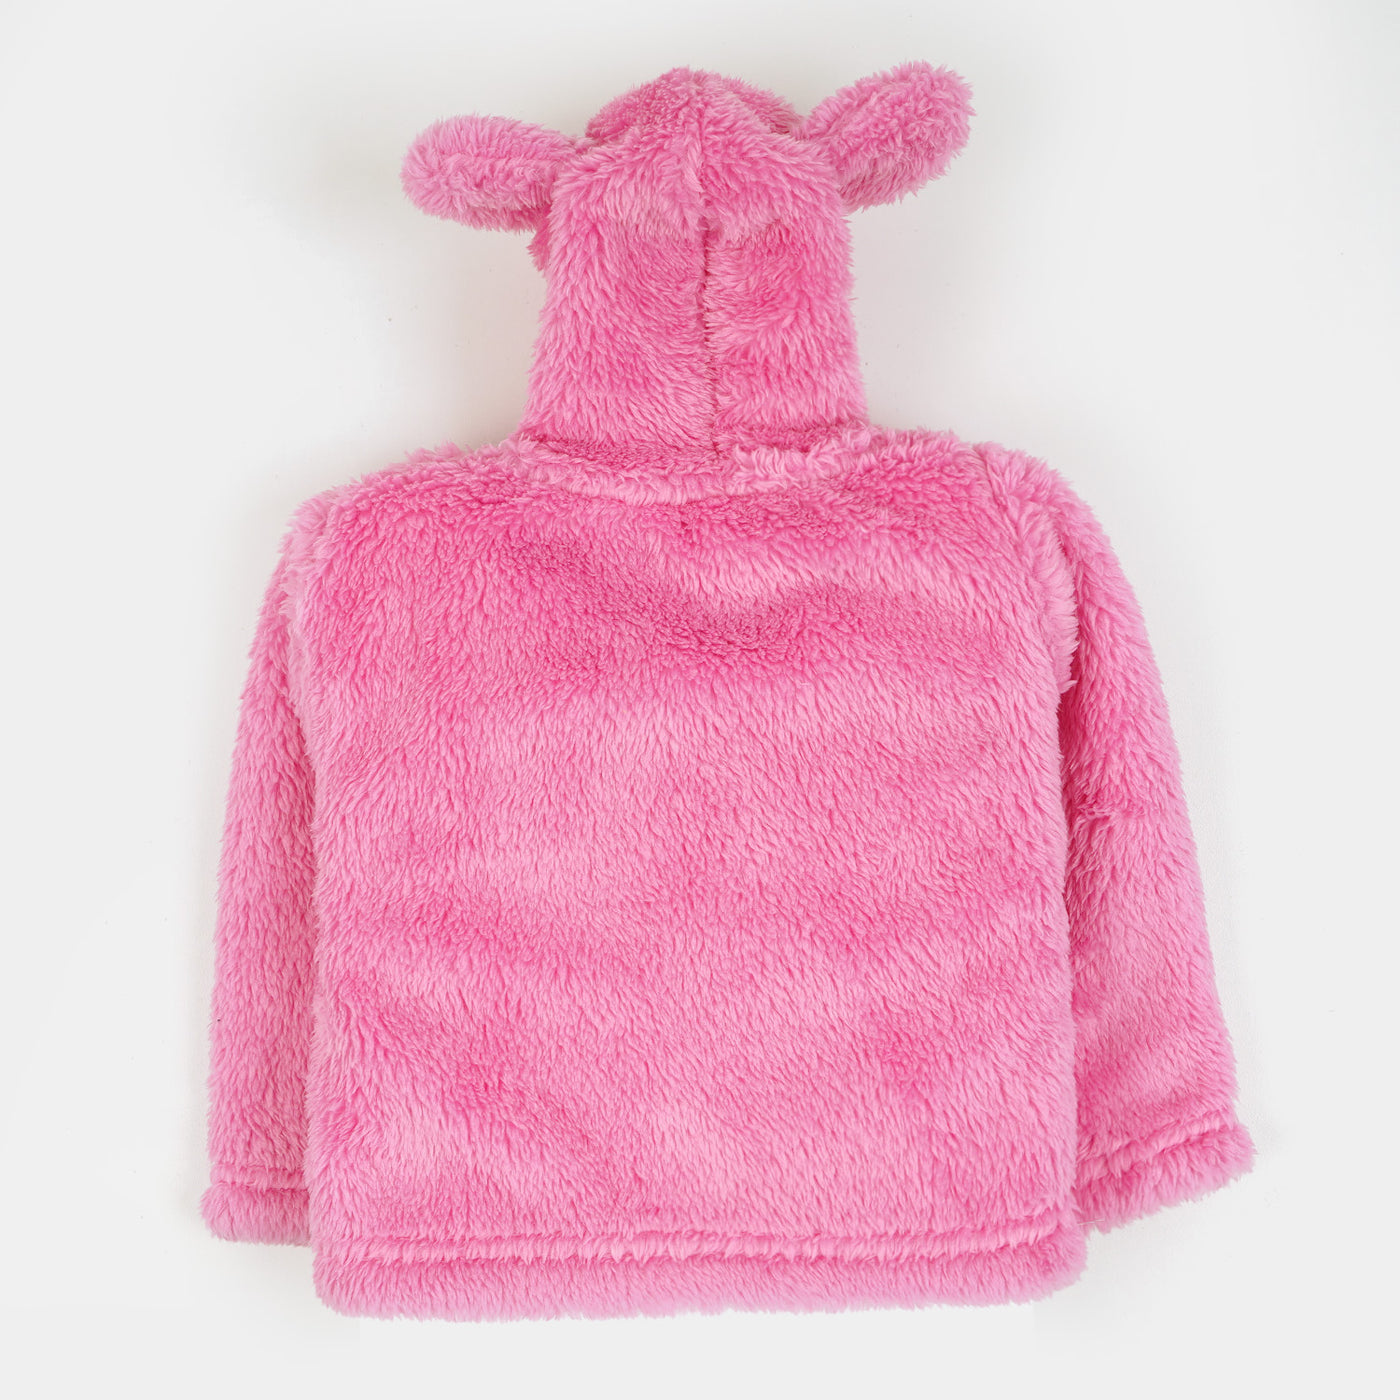 Infant Girls Knitted Jacket Character - Pink